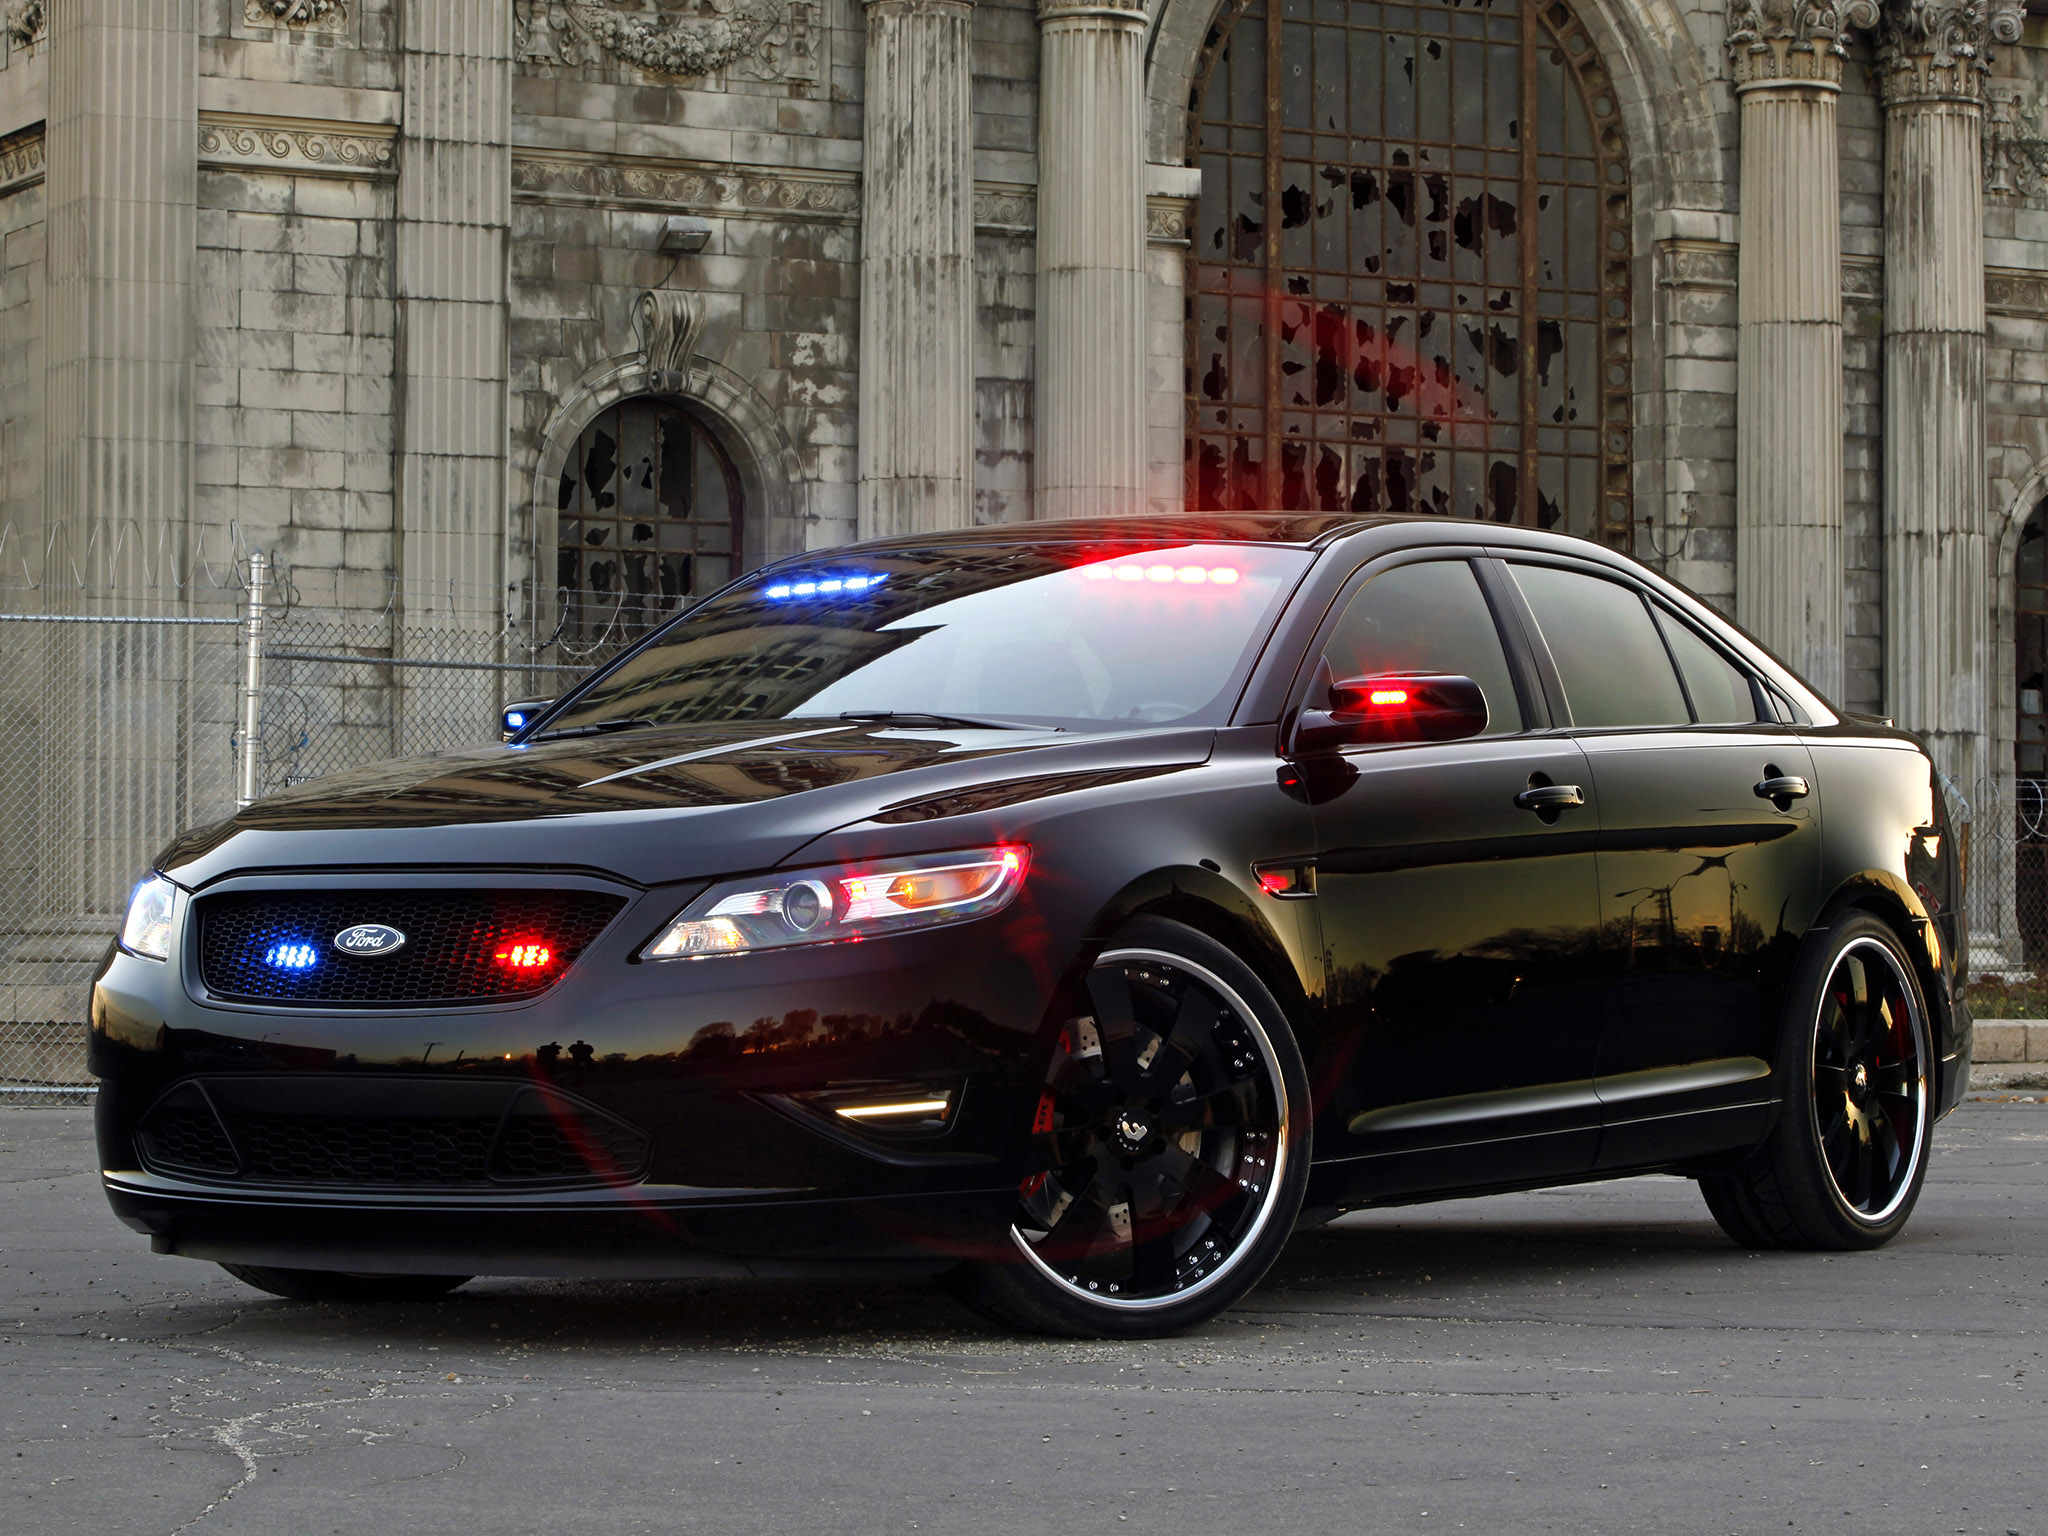 2013, Ford, Stealth, Police, Interceptor, Muscle Wallpaper